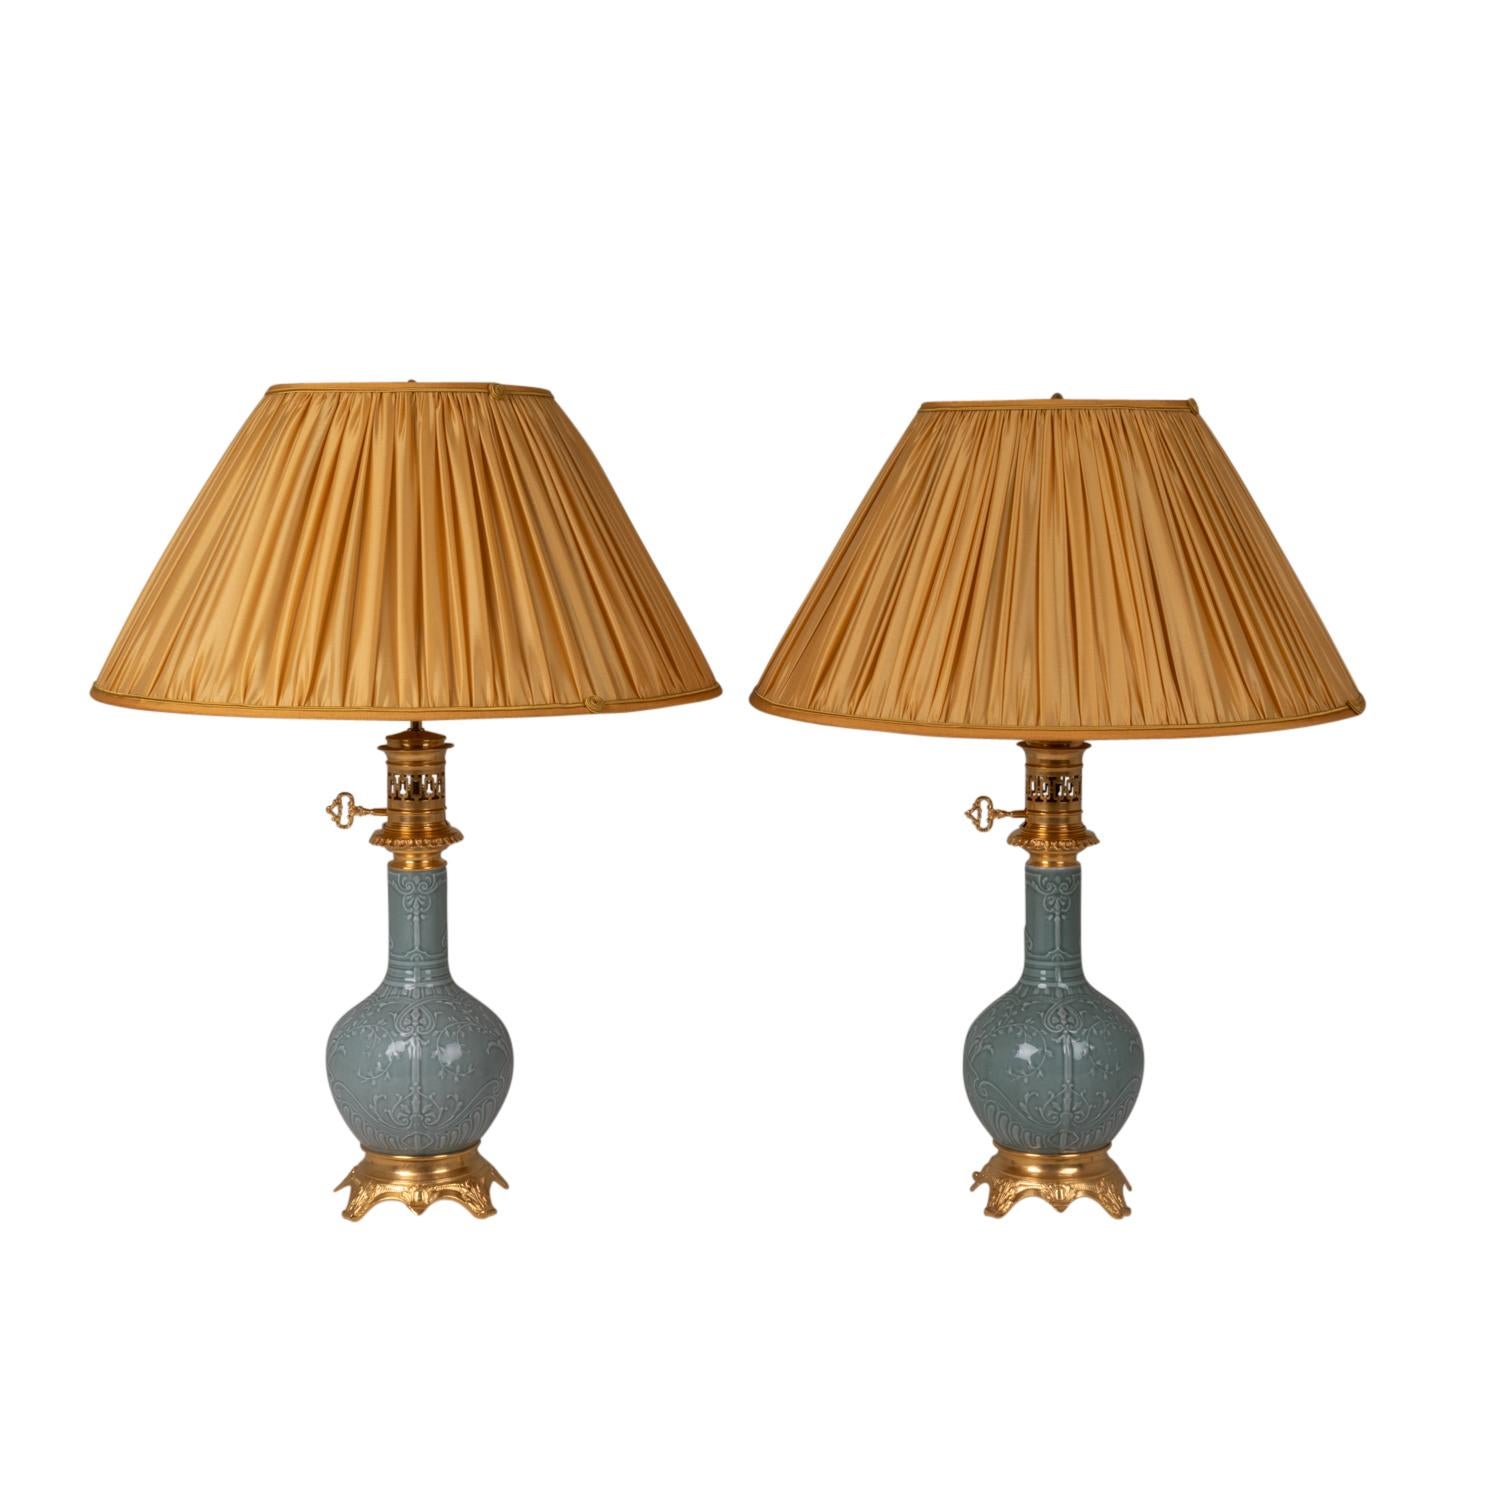 Pair of Celadon porcelain and gilt bronze lamps, with floral decoration in low relief and in baluster shape. Quadripod base adorned with leaves, concave in shape.

French work realized circa 1880.

!The price does not include the price of the